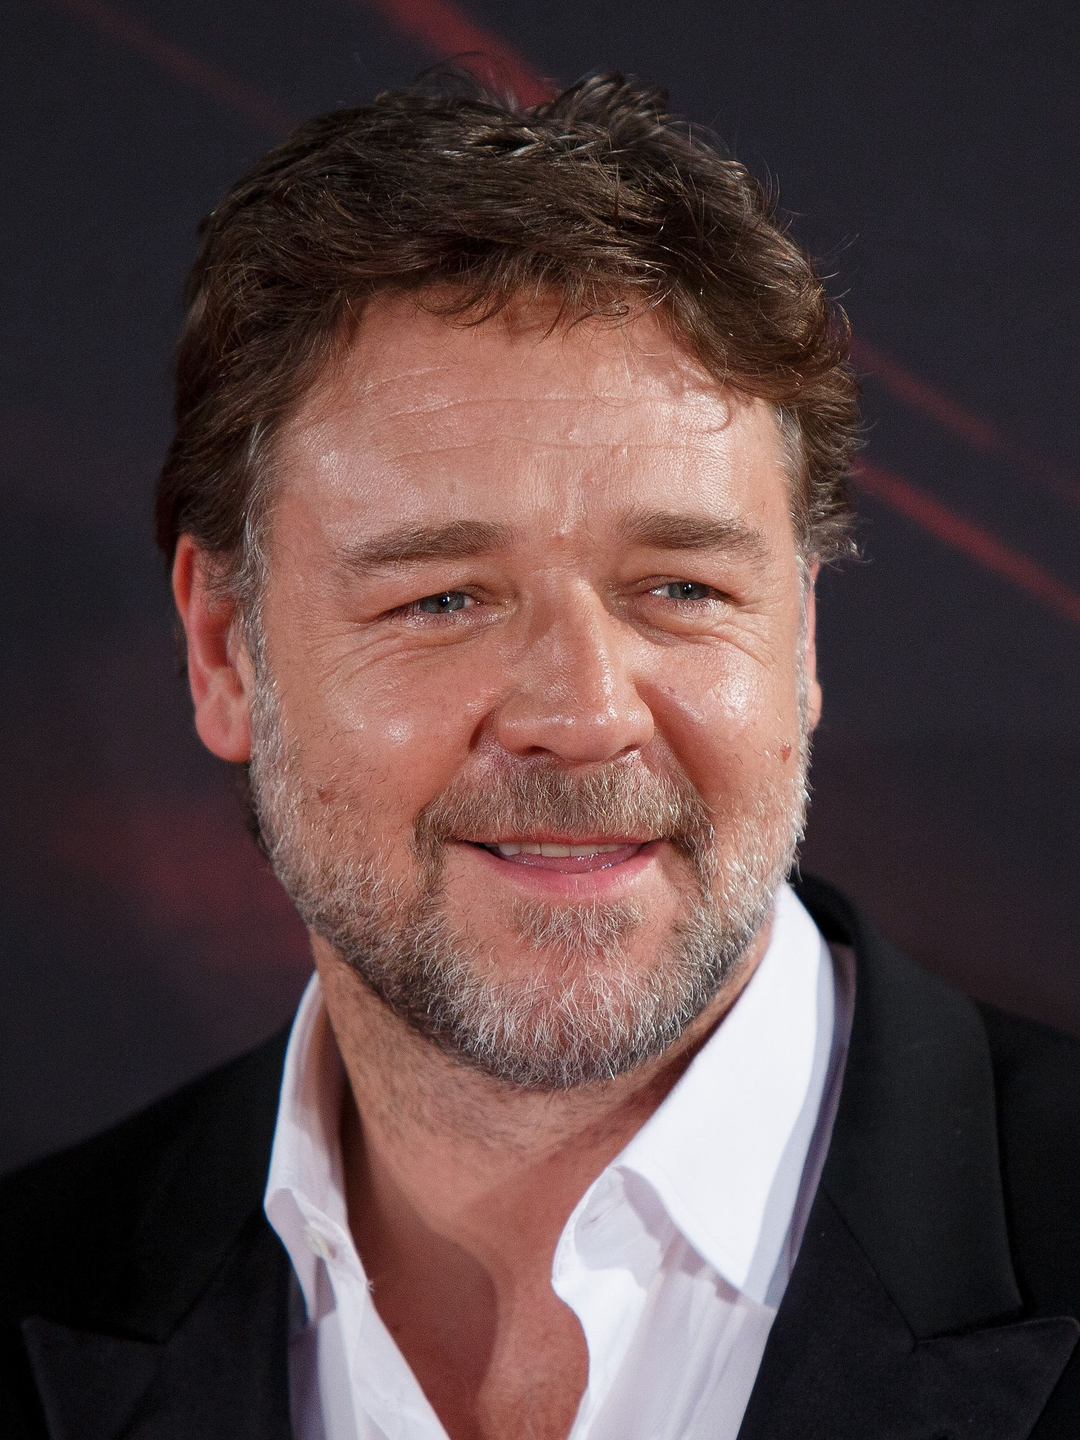 Russell Crowe biography